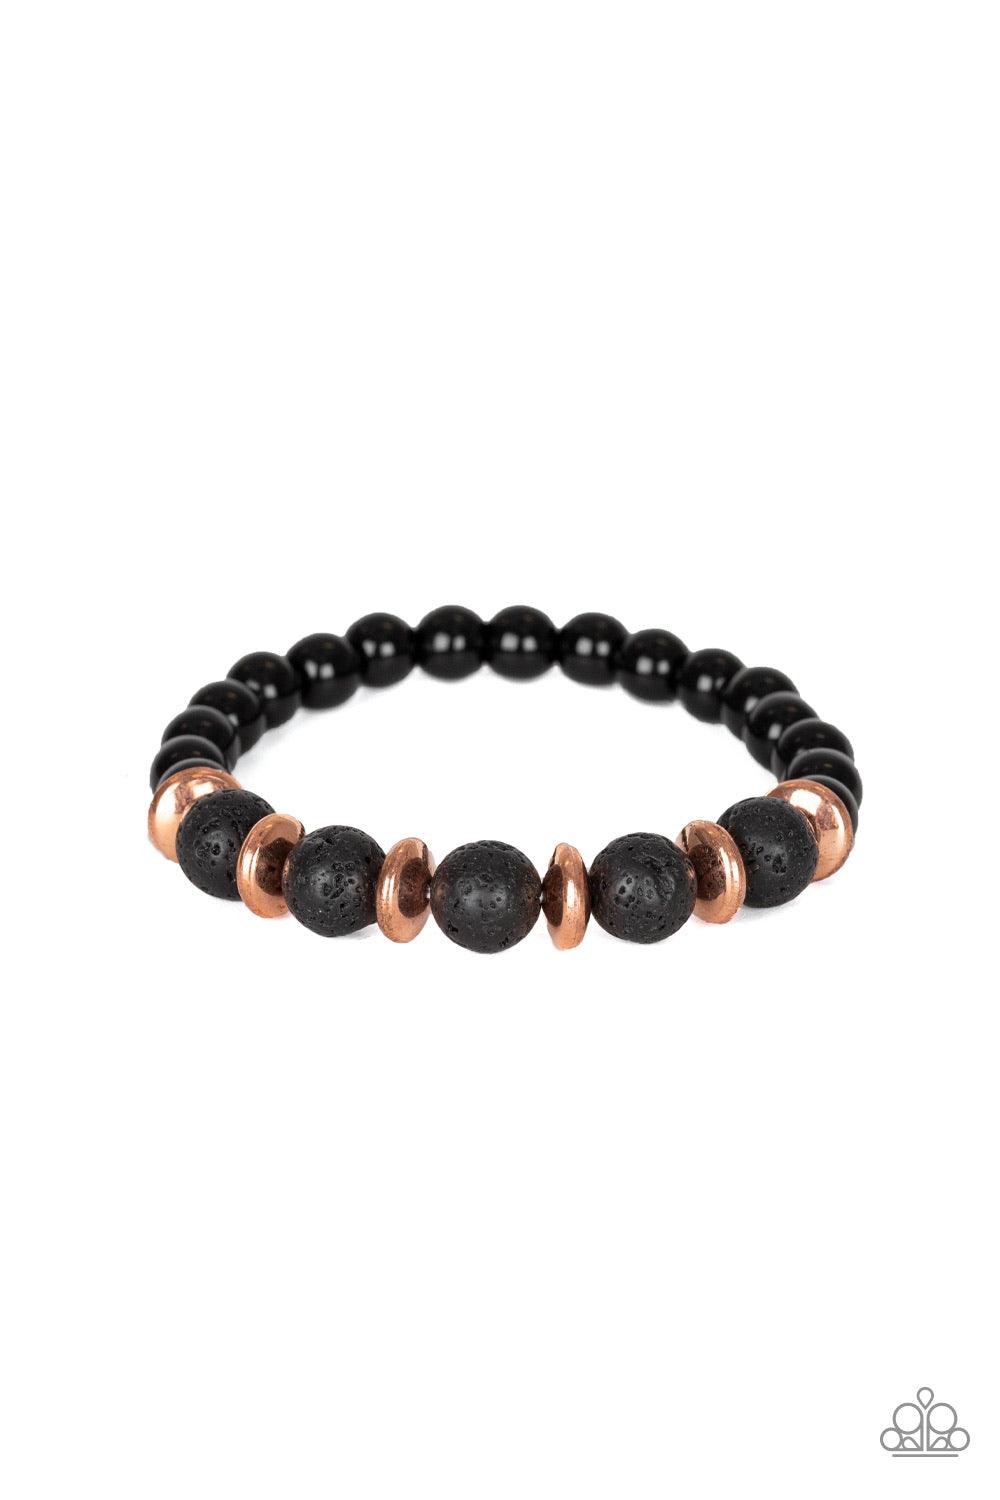 Paparazzi Accessories Truth - Copper A collection of polished black beads, shiny copper accents, and earthy lava rock beads are threaded along a stretchy band around the wrist for a seasonal look. Jewelry